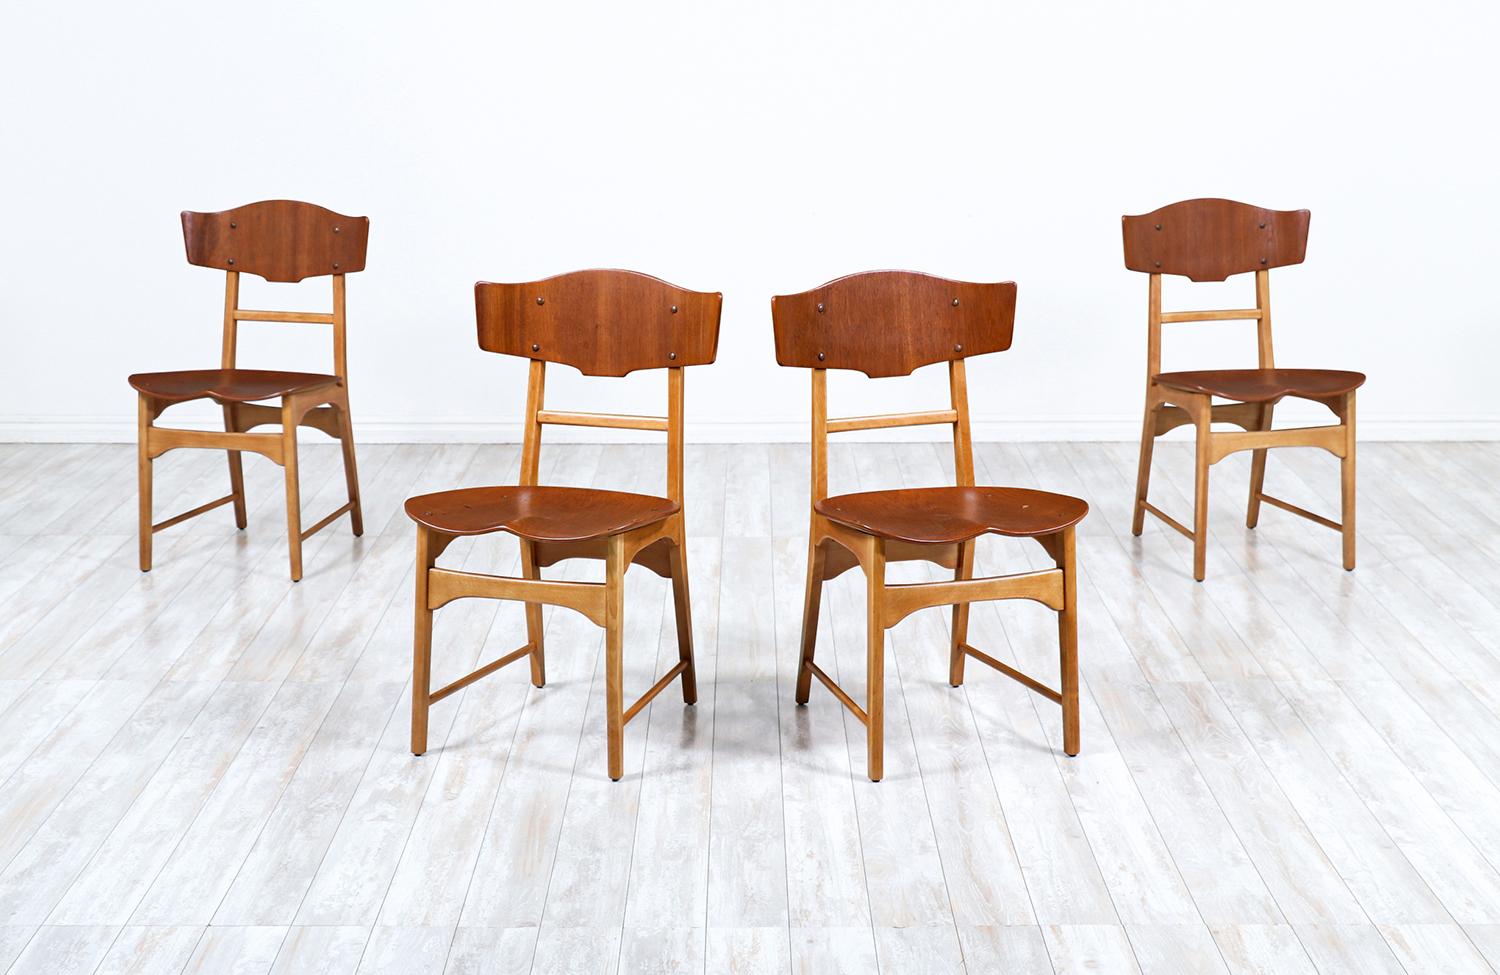 Danish modern sculpted teak & oak dining chairs.

________________________________________

Transforming a piece of Mid-Century Modern furniture is like bringing history back to life, and we take this journey with passion and precision. With over 17